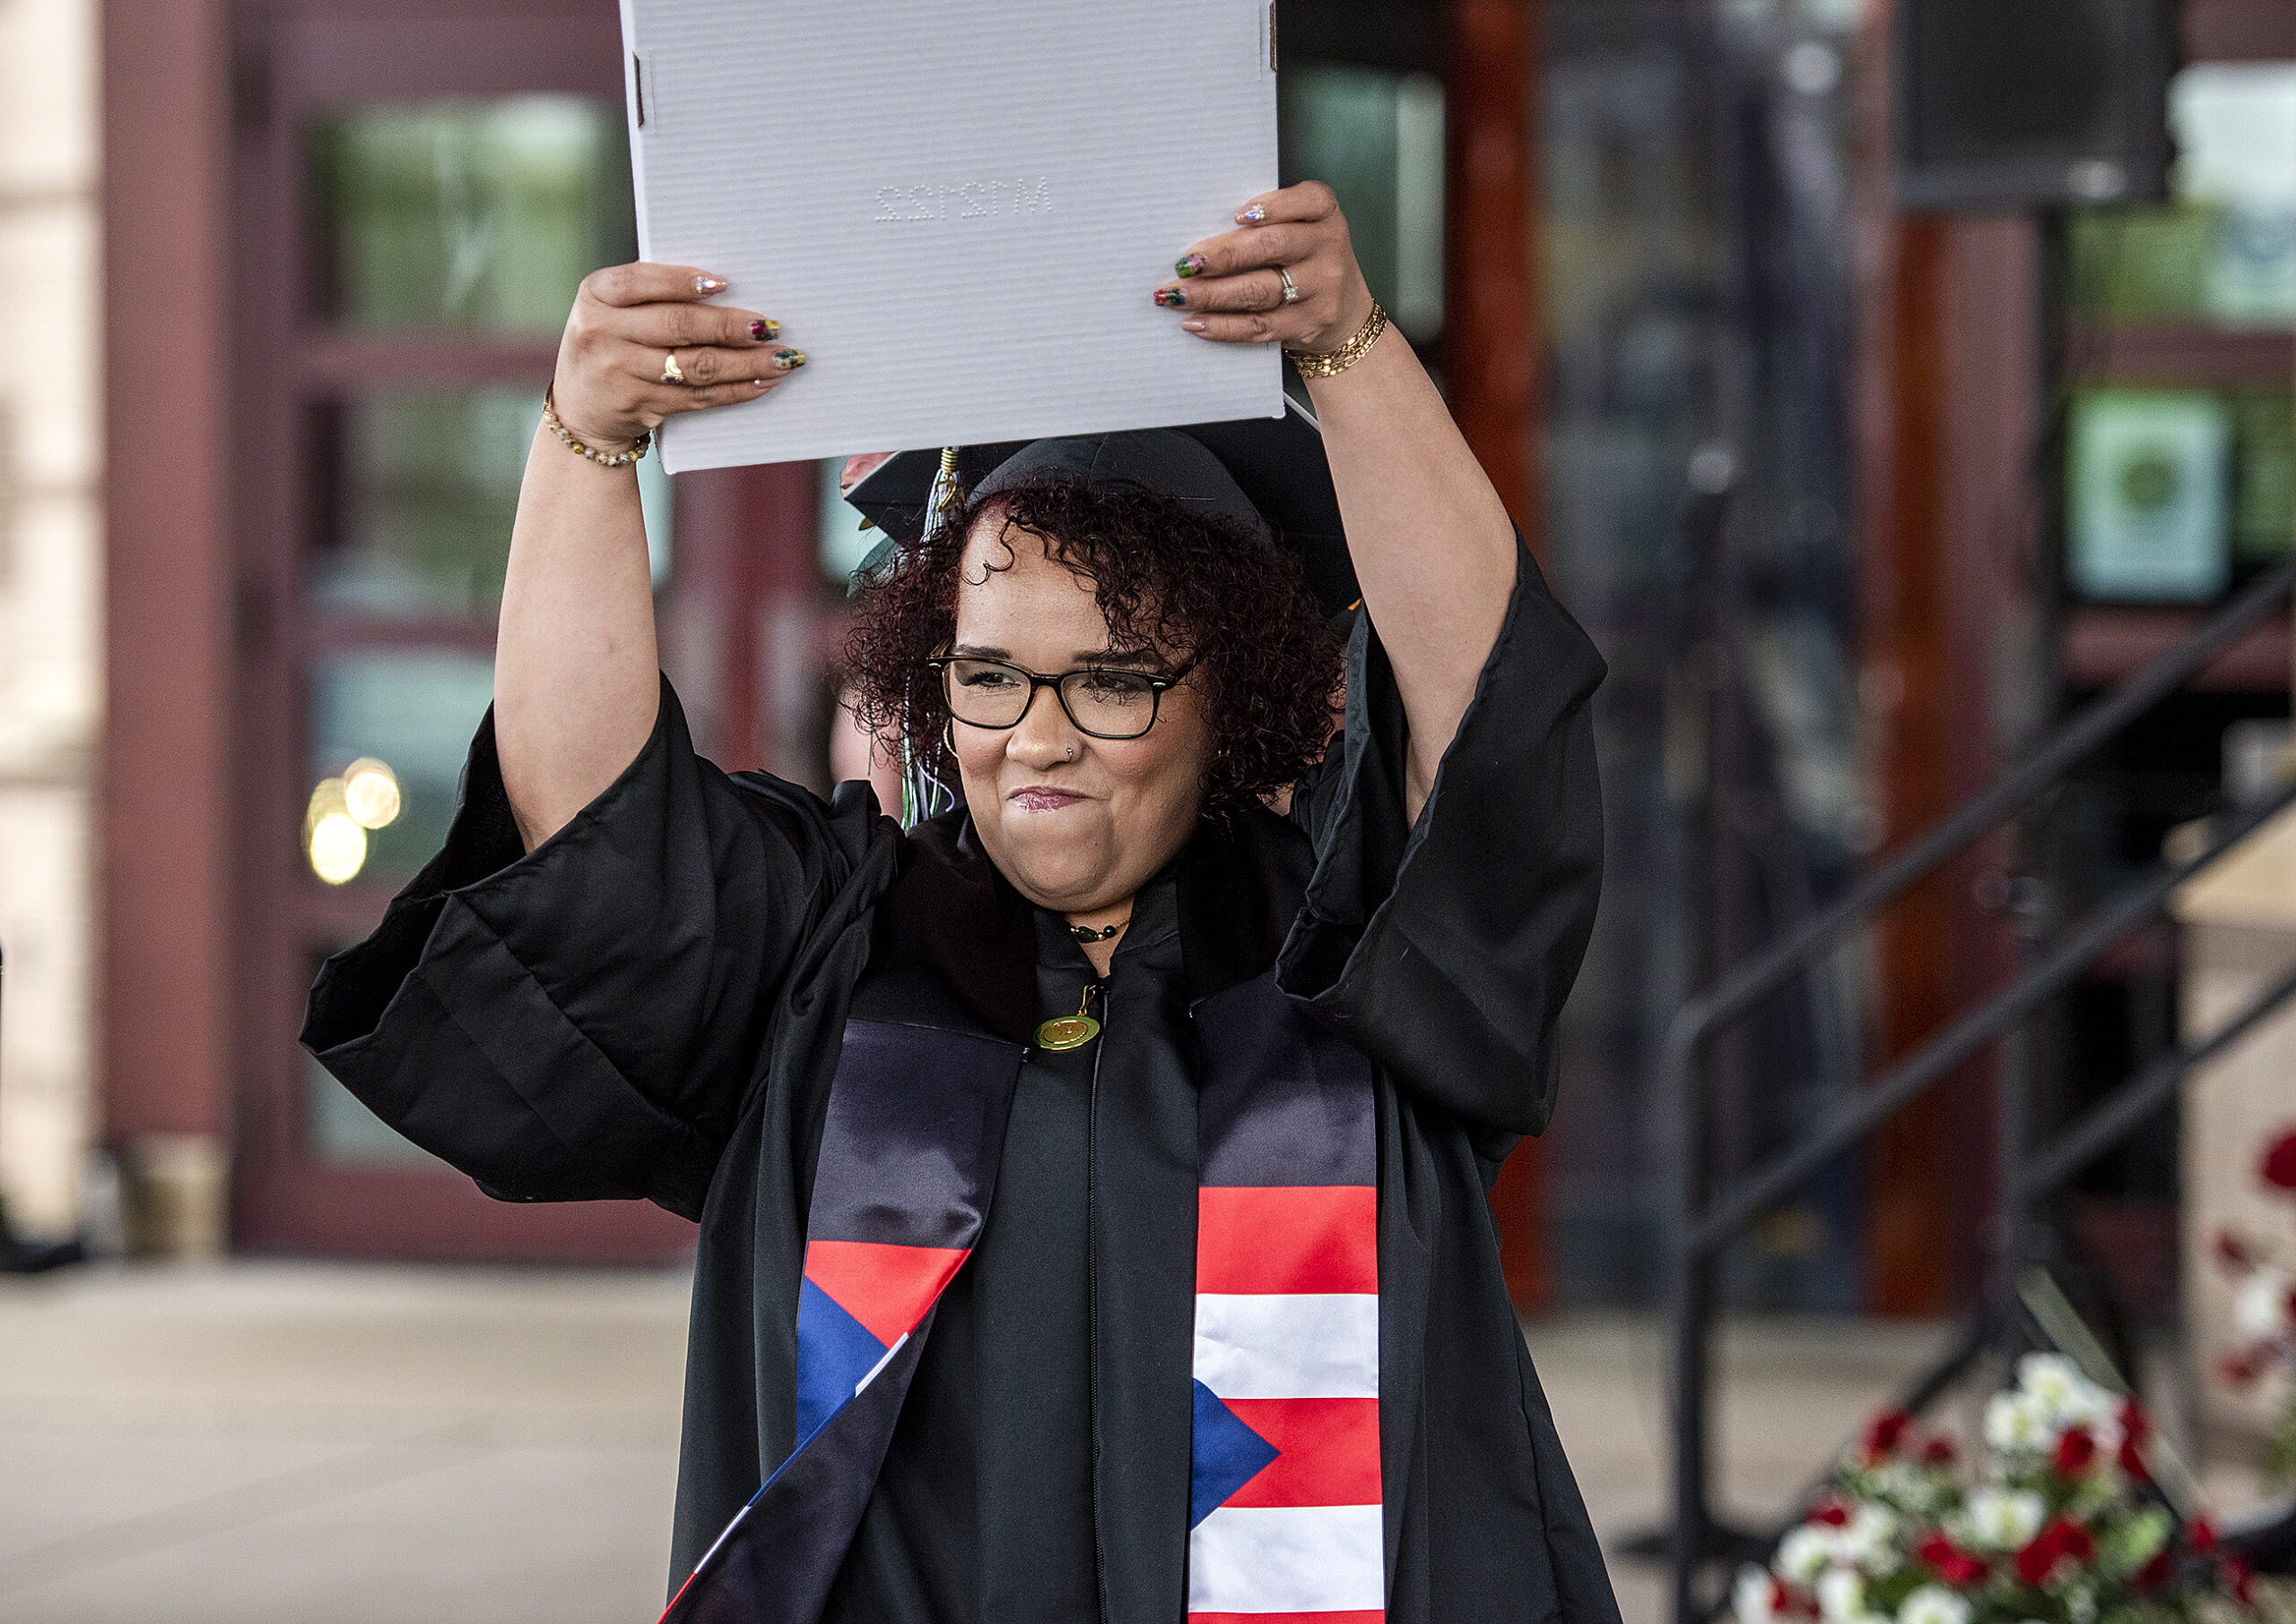 A graduate holds a diploma above her head with a determined expression.